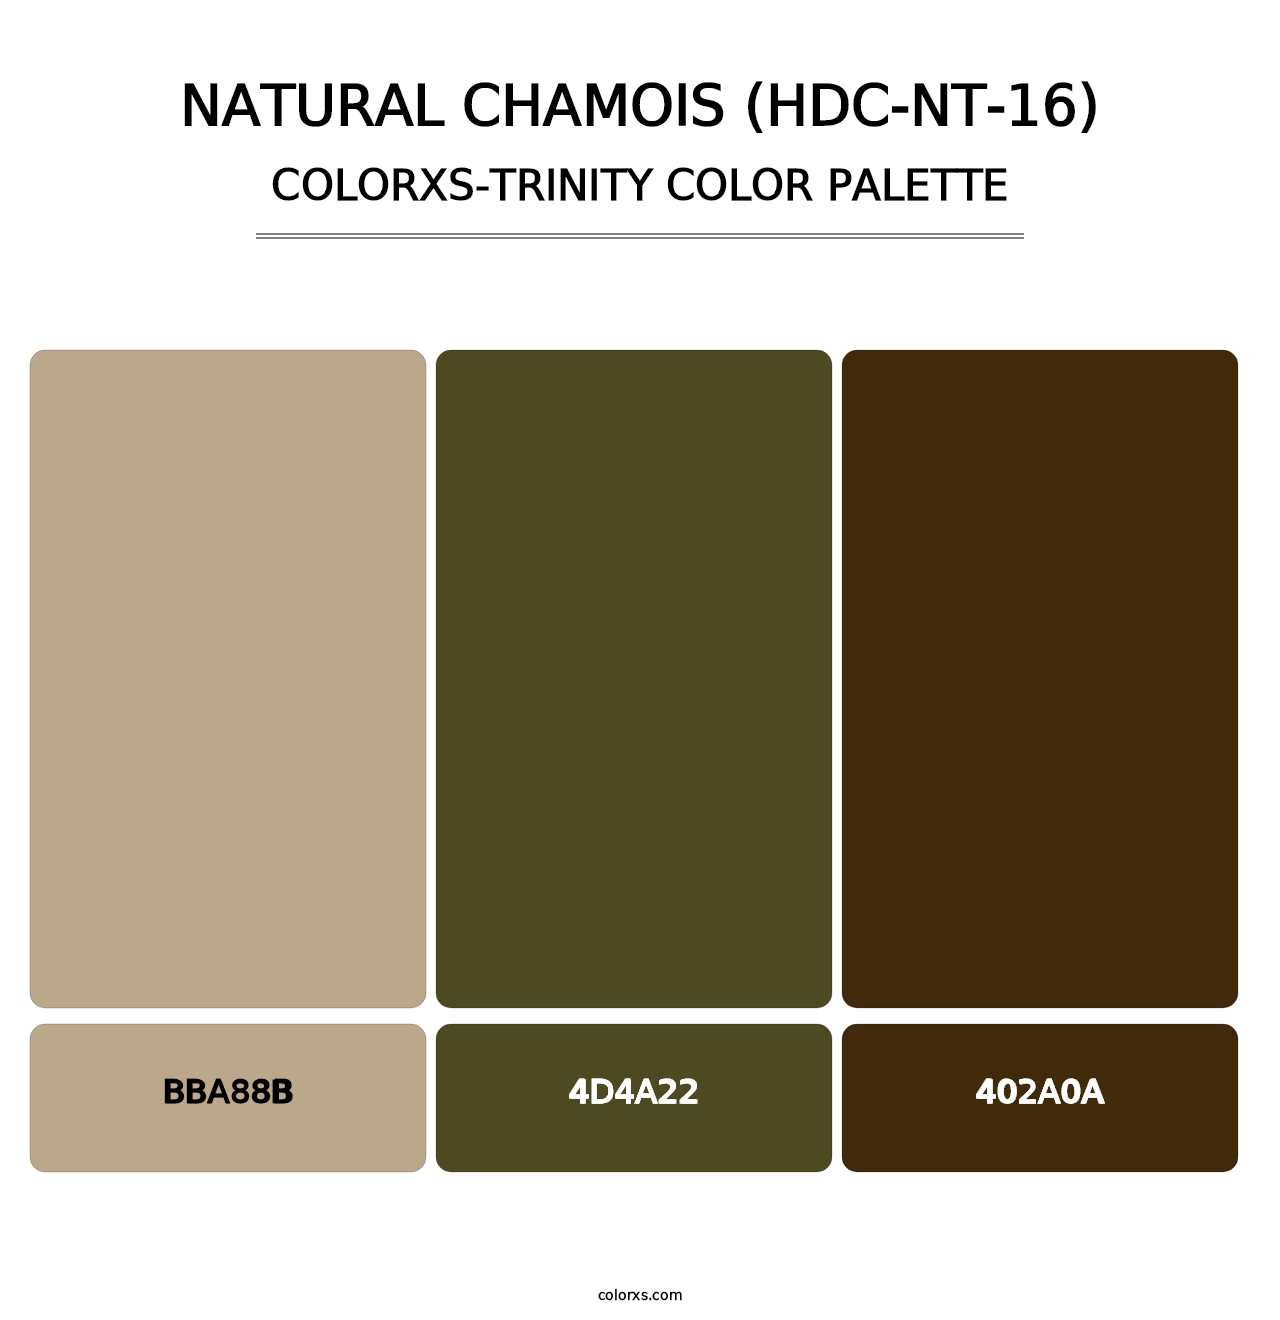 Natural Chamois (HDC-NT-16) - Colorxs Trinity Palette